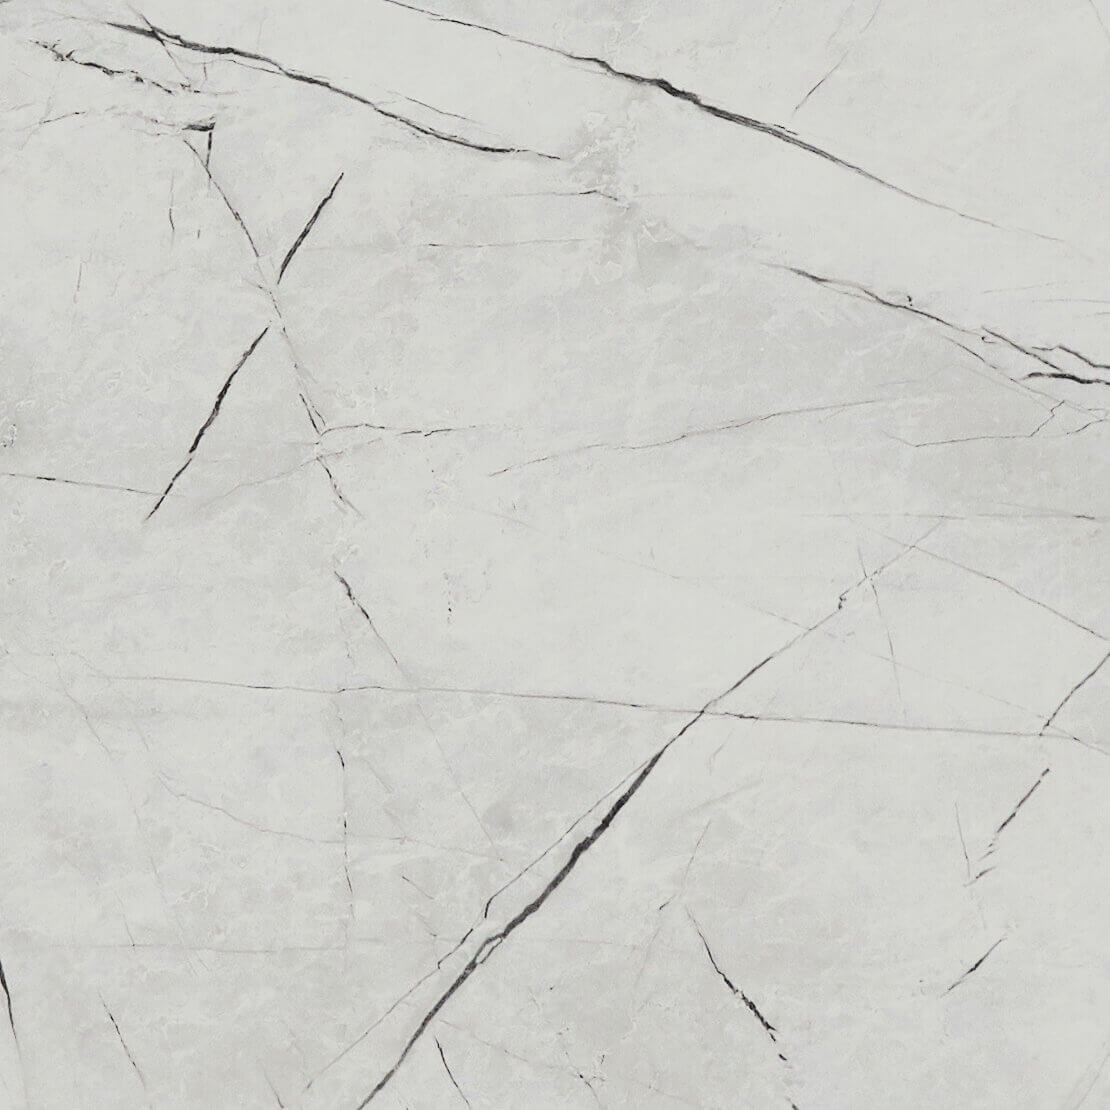 Grey Veined Marble Close Up View